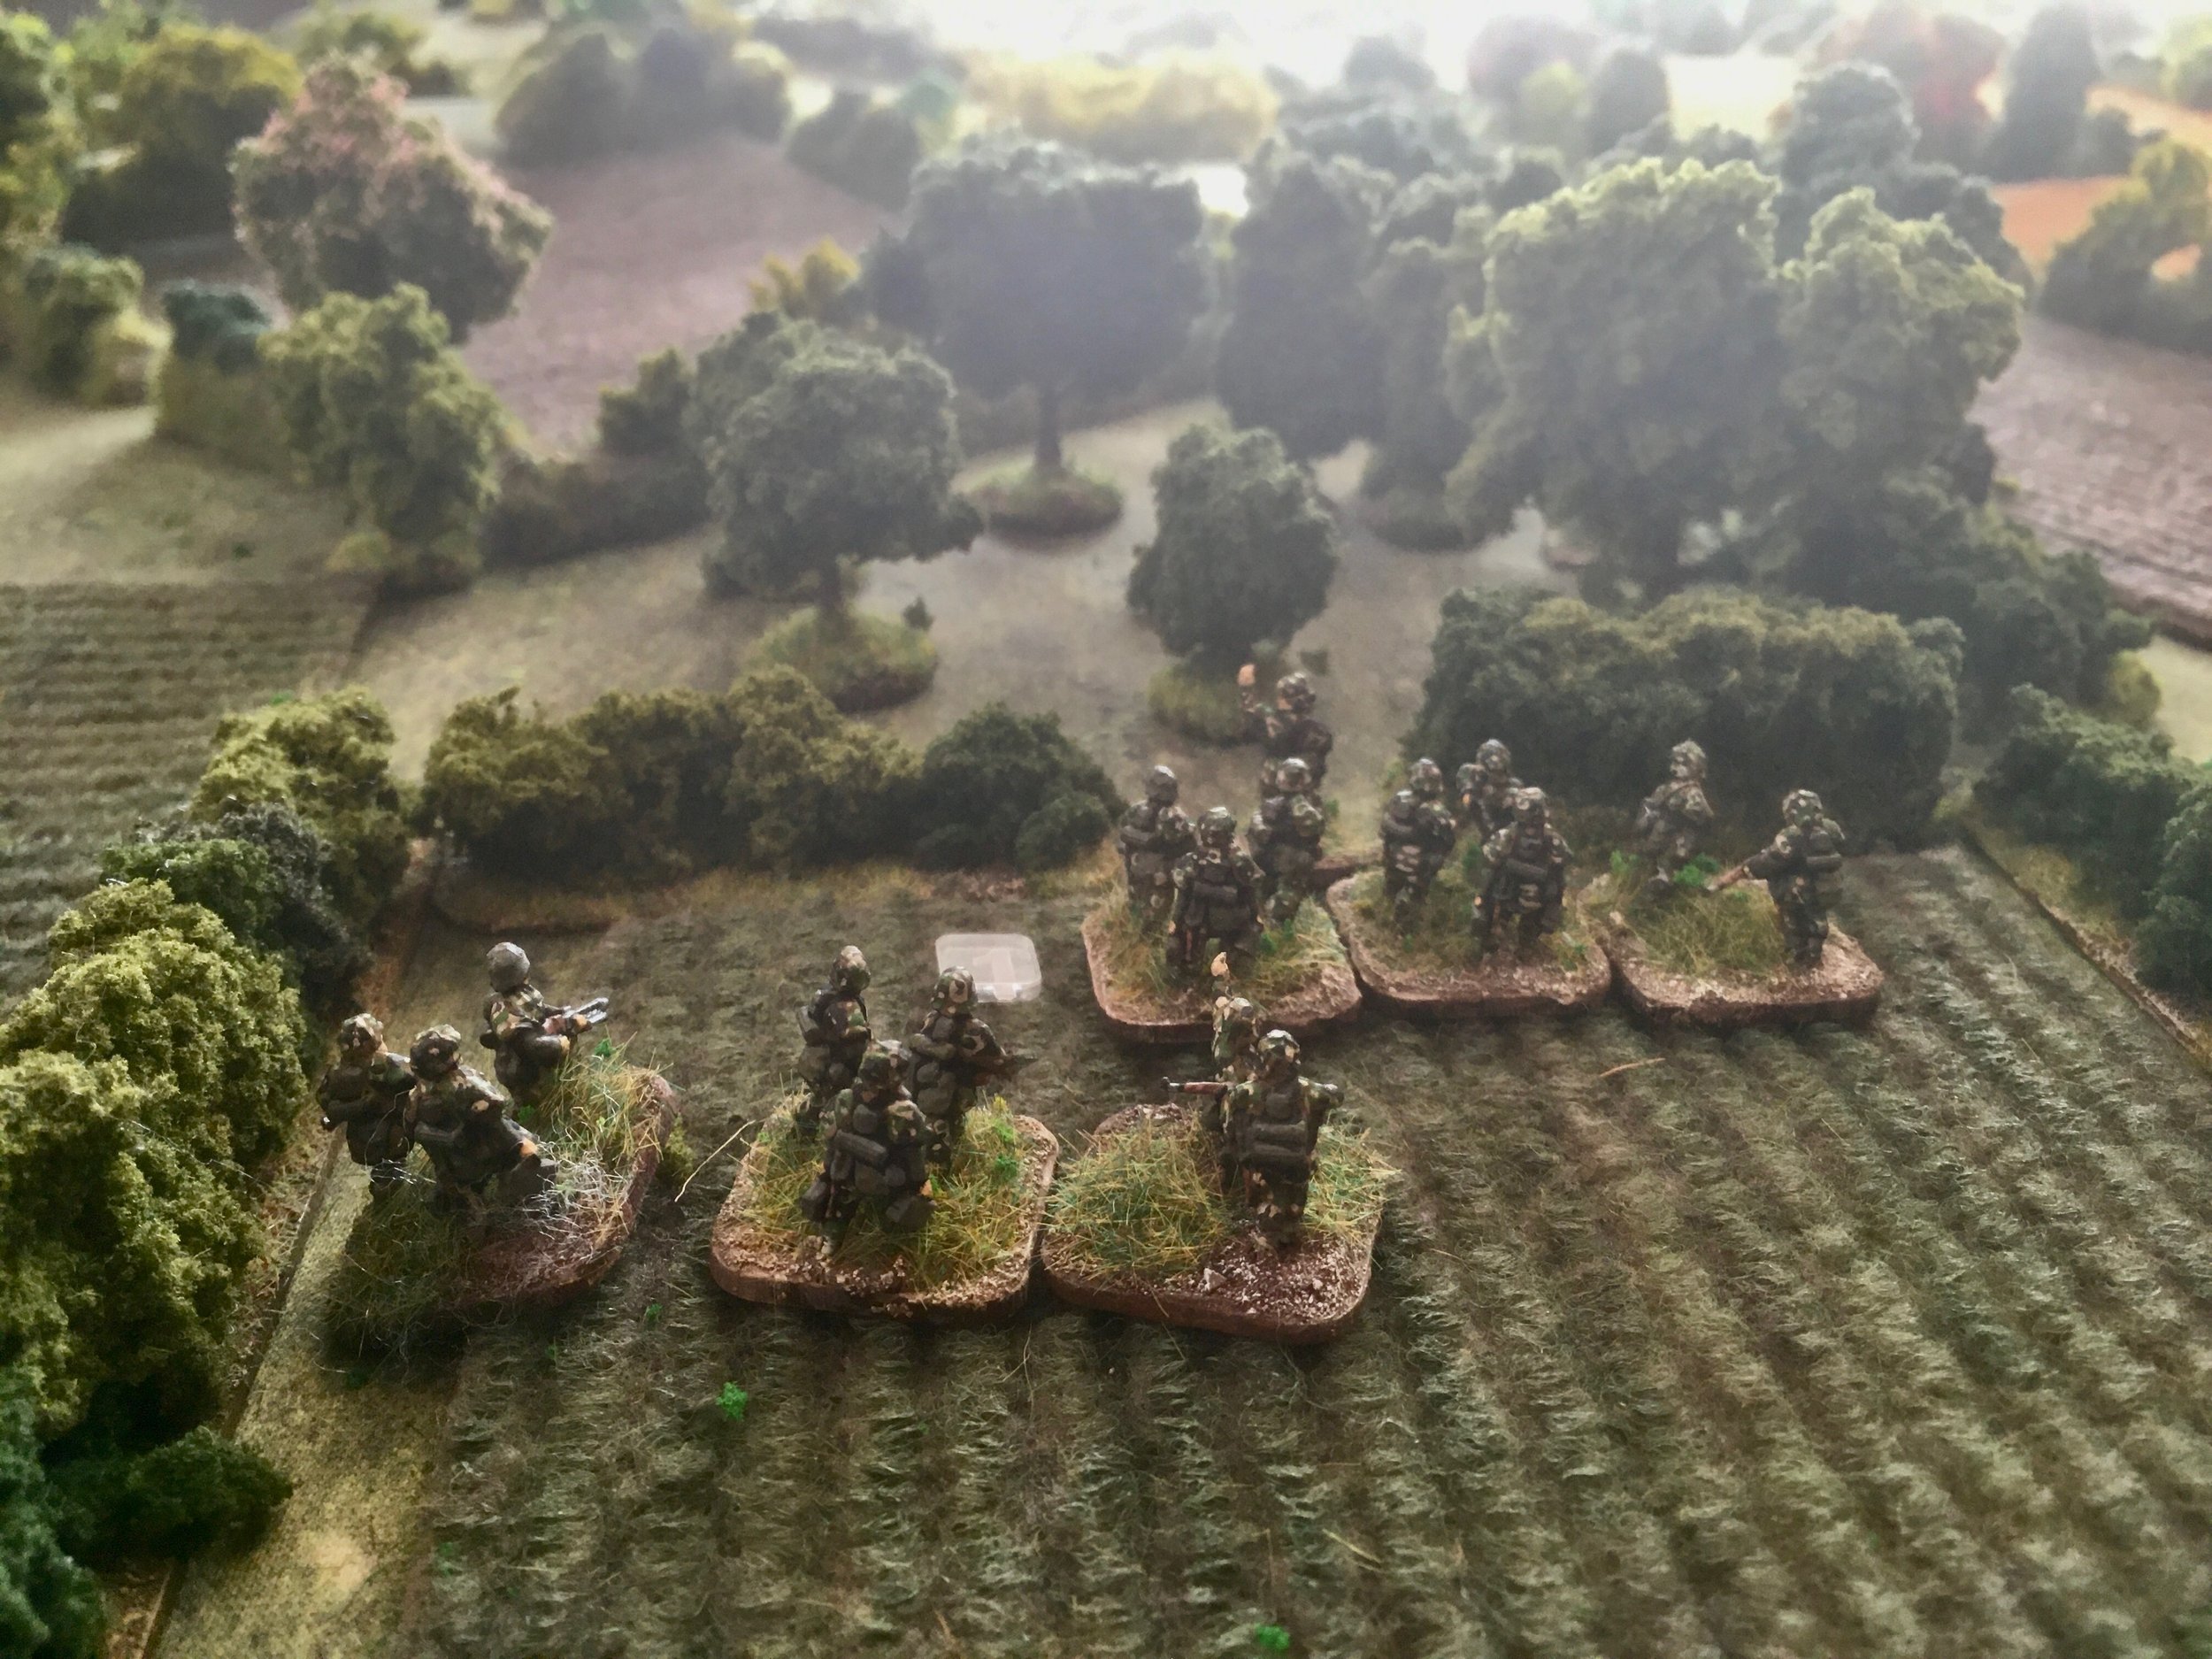 Commanding the infantry of Das Reich I tried to employ some tactics by advancing a platoon down each flank to see where the enemy was concentrated, holding back a third as a reserve.